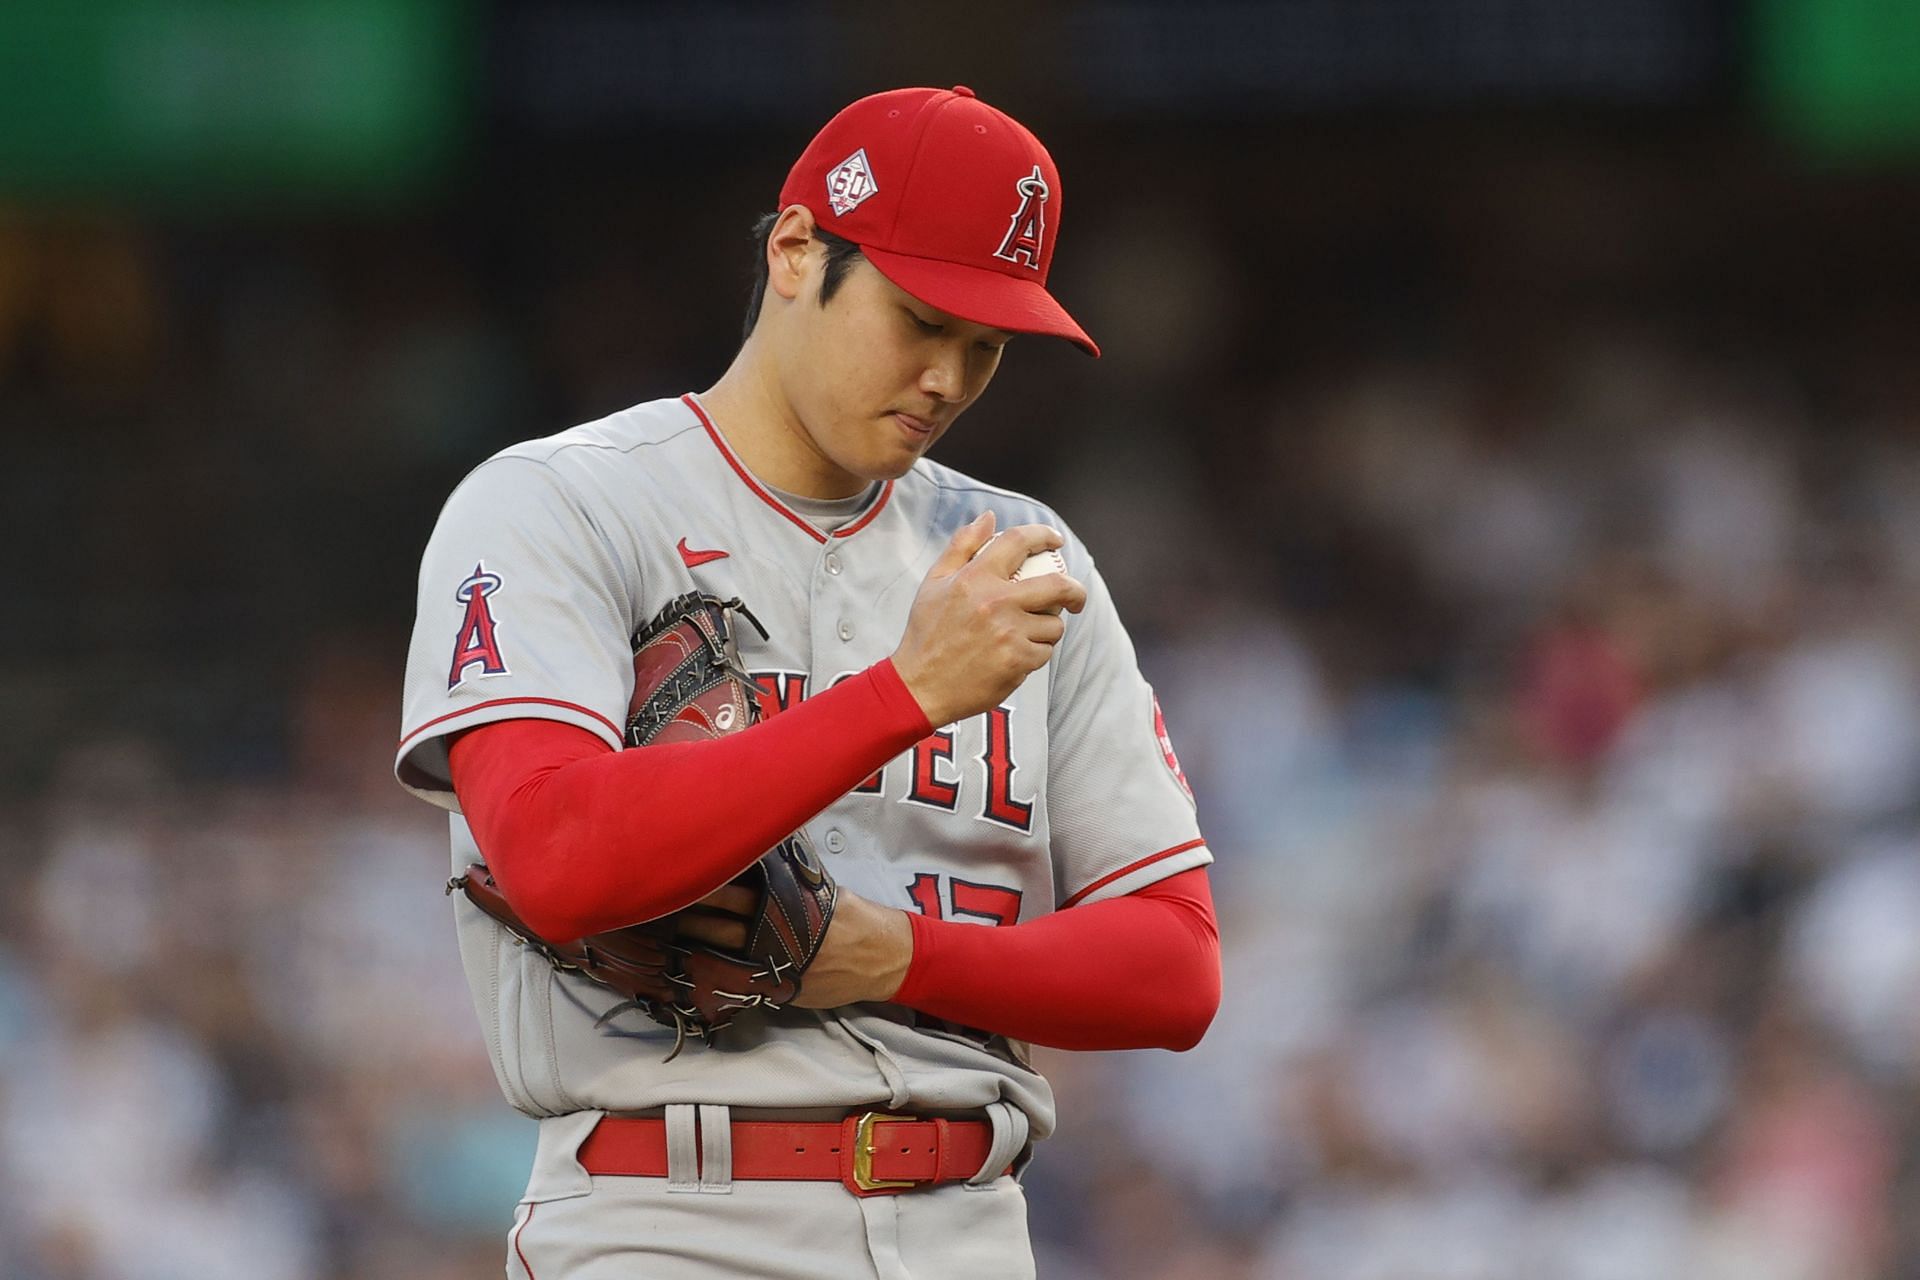 Los Angeles Angels SP Shohei Ohtani appears to be dealing with heavy fatigue.